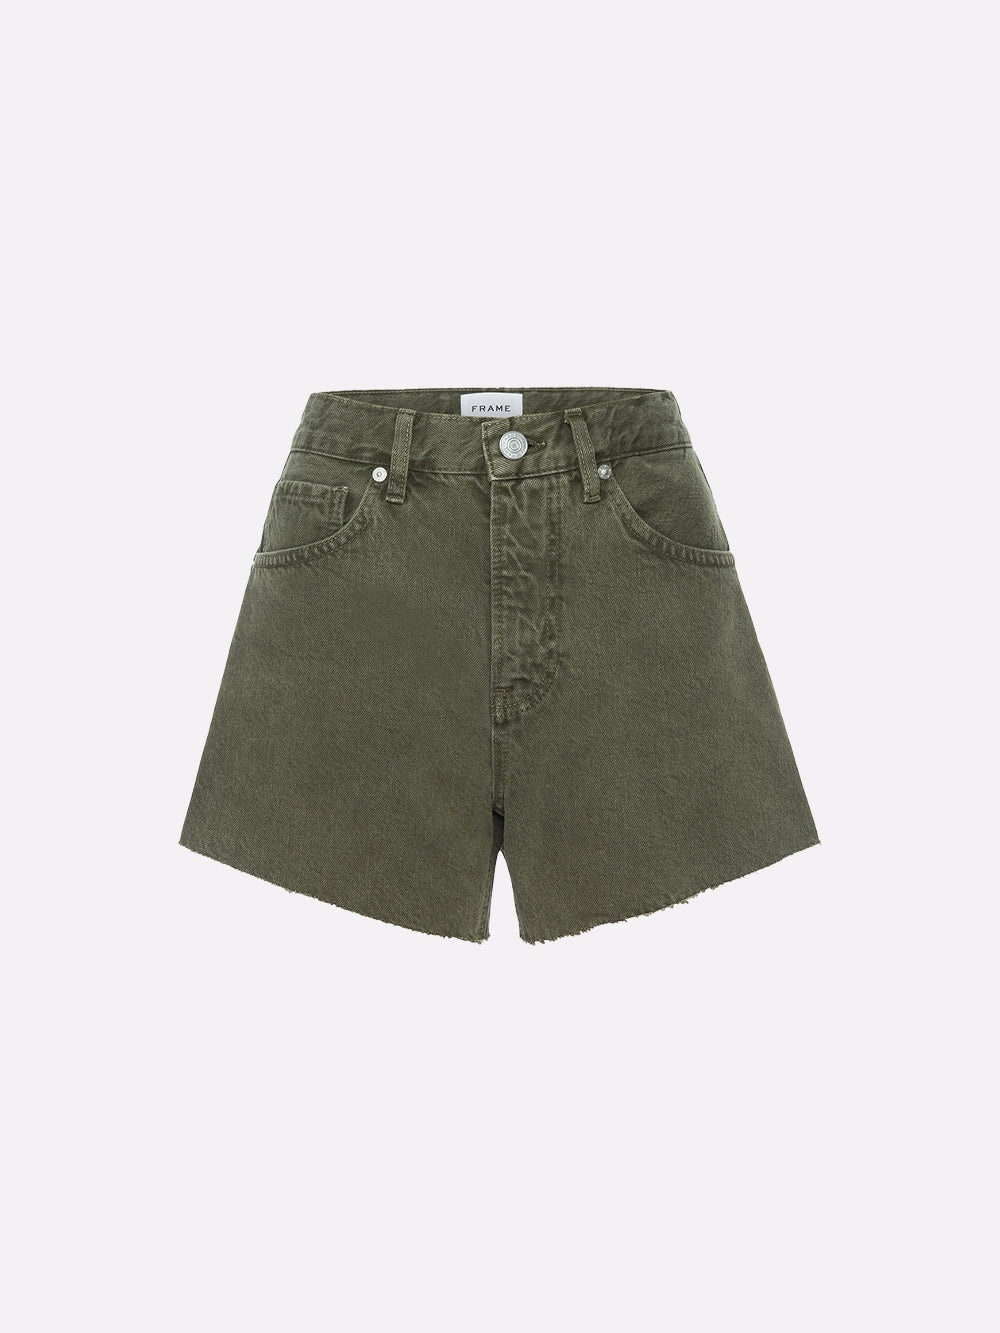 Le Super High Short in Stoned Fatigue - 1